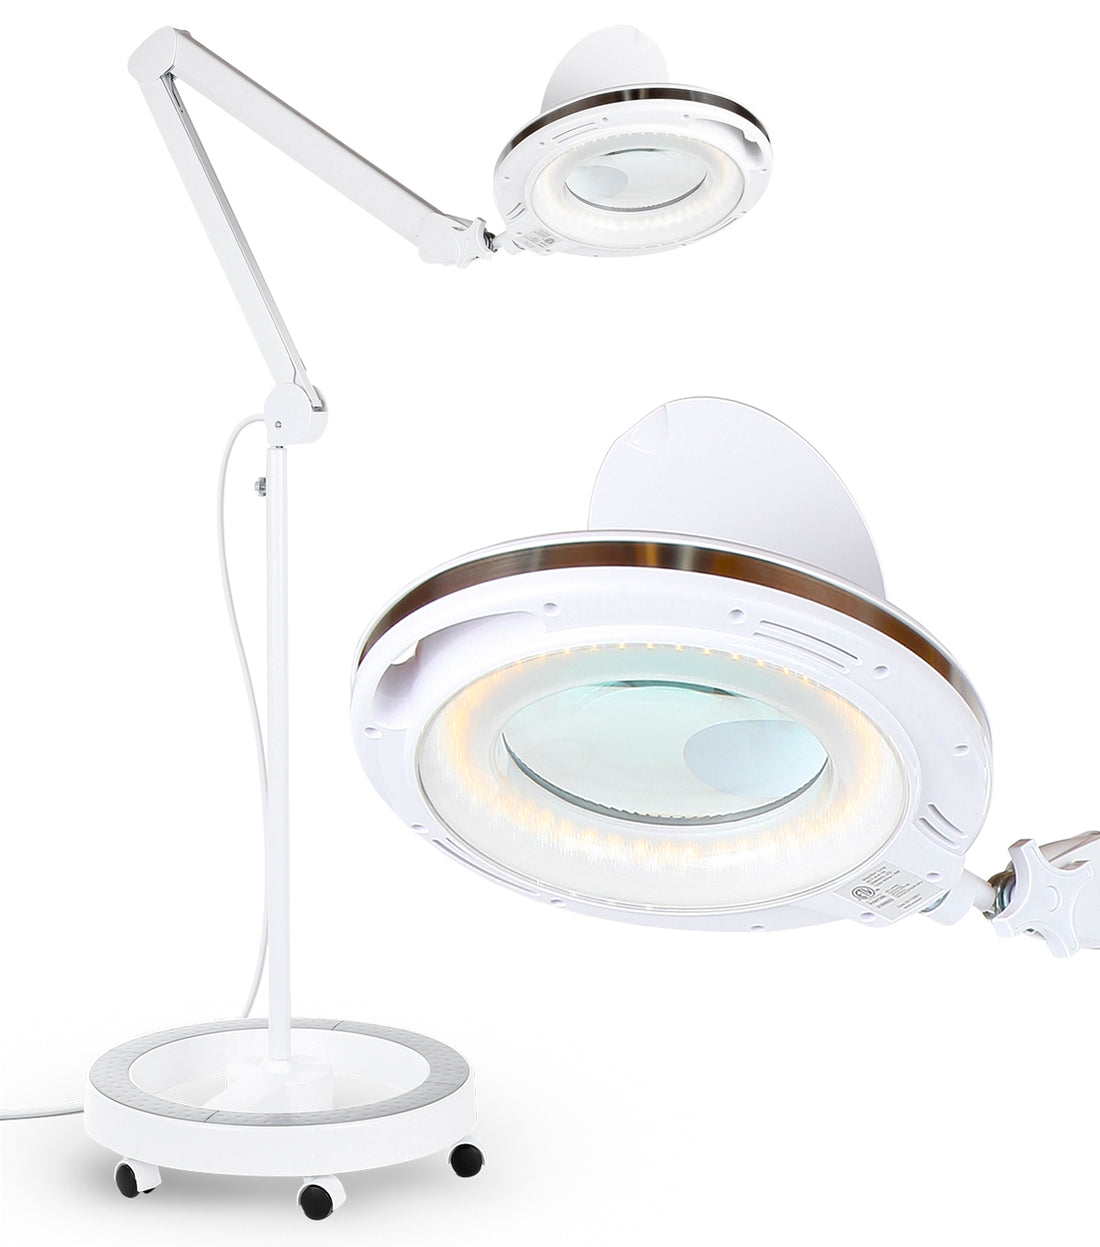 High Quality beauty salon magnifying glass with light For Varied Uses 